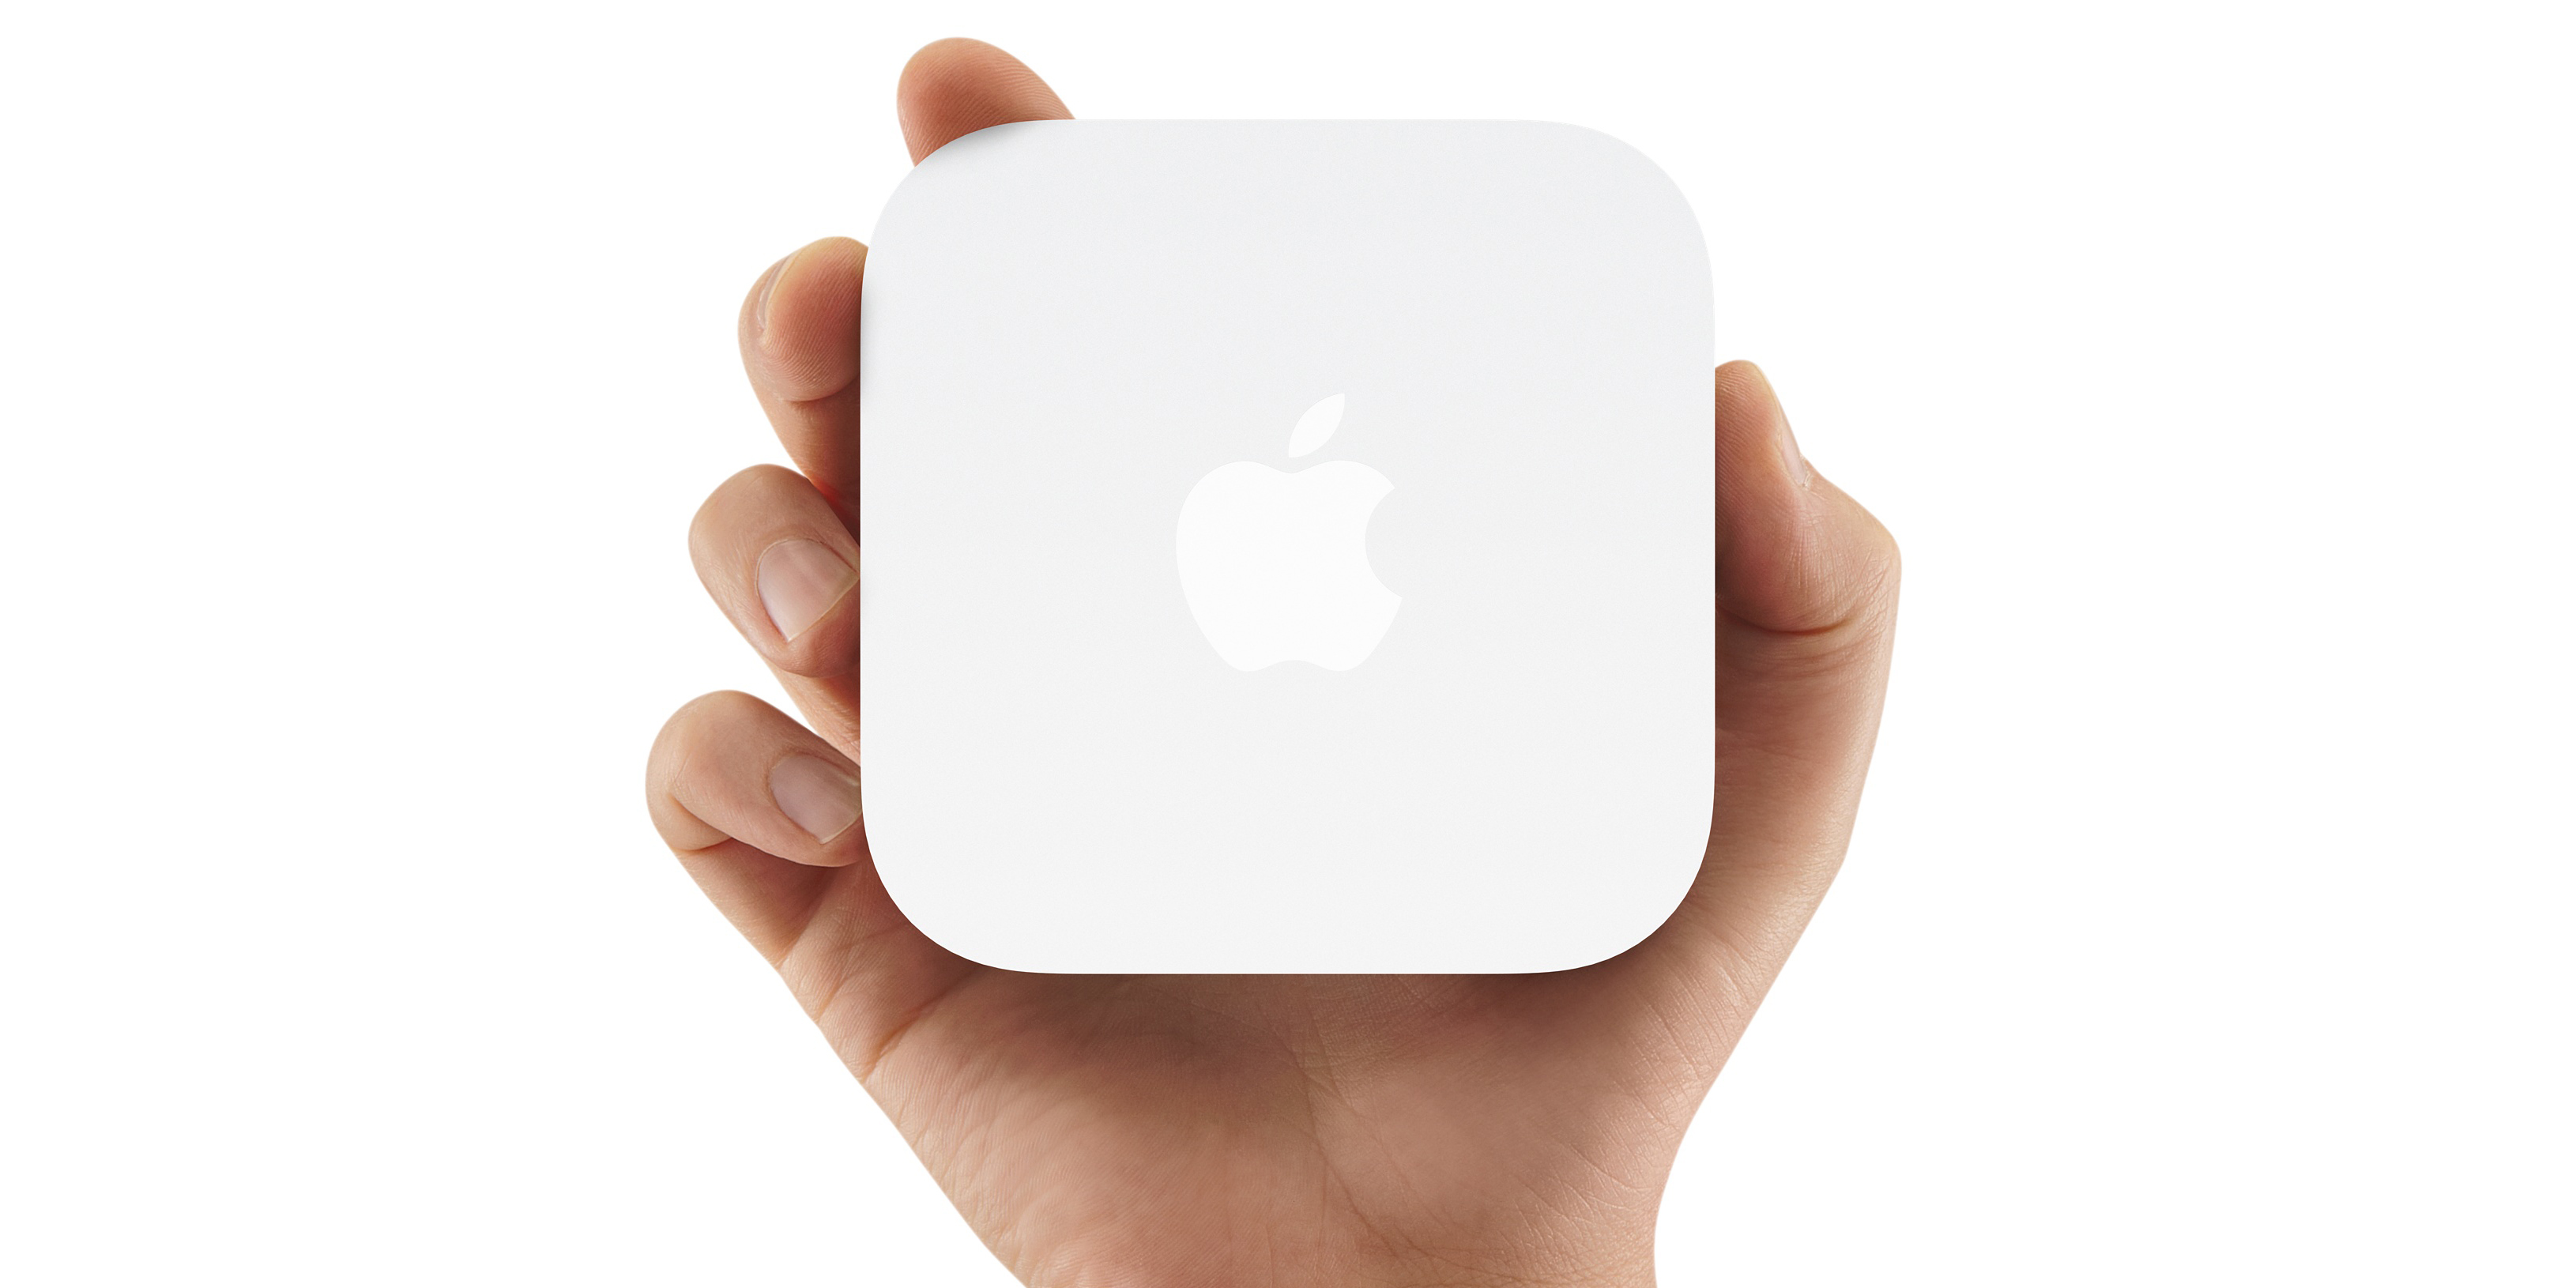 How to use AirPort Express for AirPlay 2 with existing router - 9to5Mac